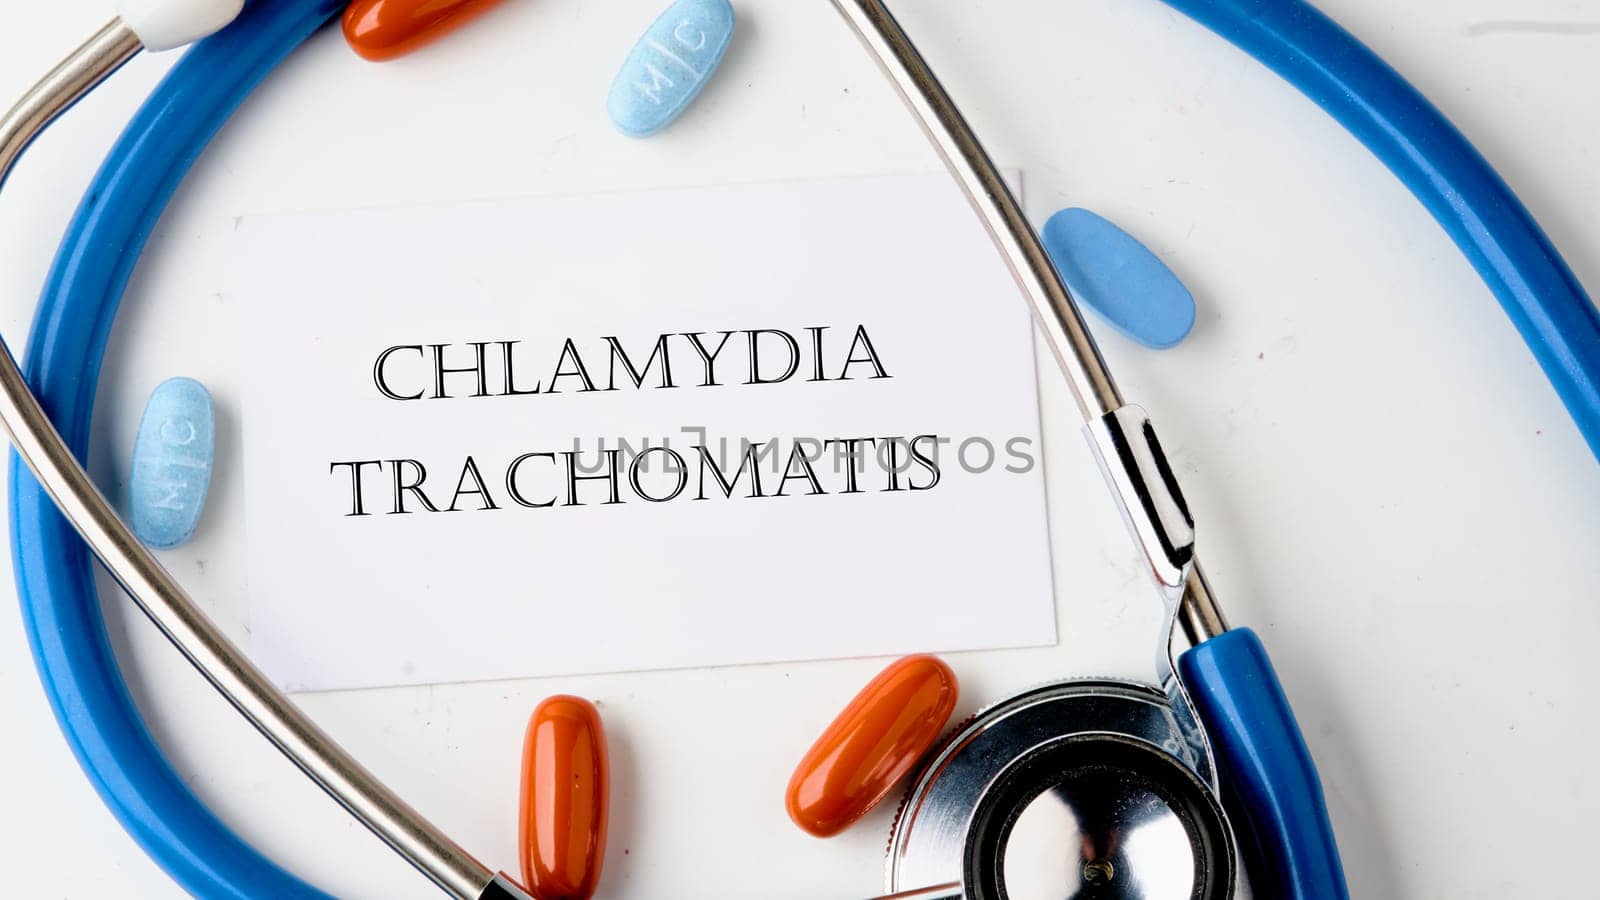 Chlamydia trachomatis on the card on a white background. Concept photo